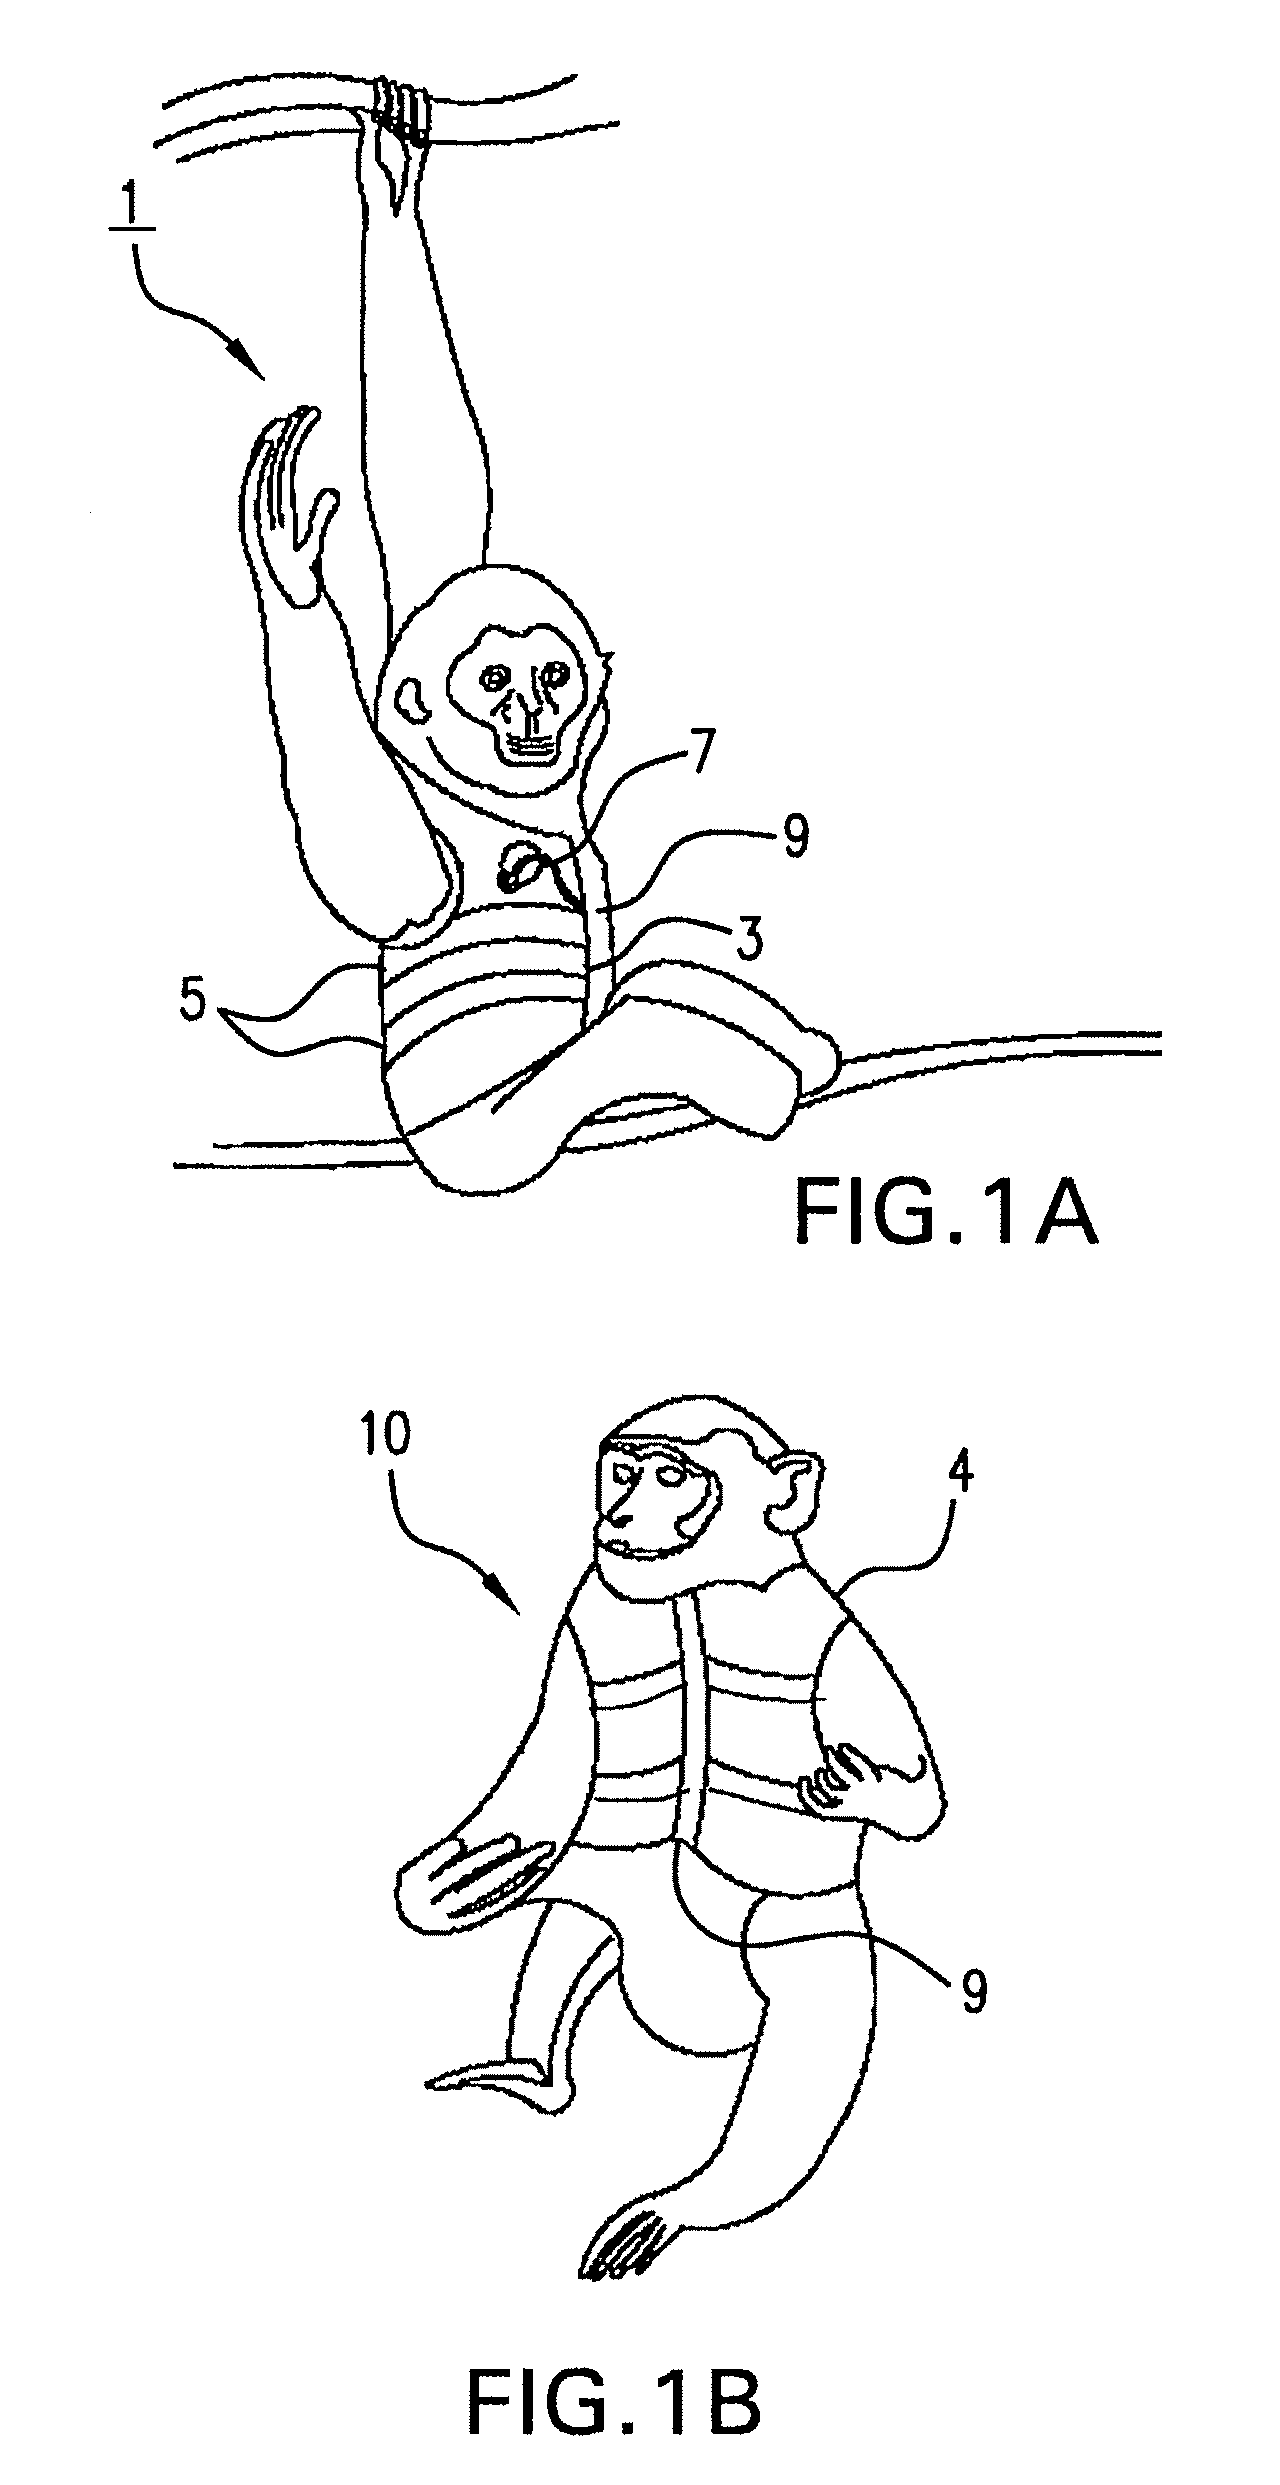 Systems and methods for non-invasive physiological monitoring of non-human animals